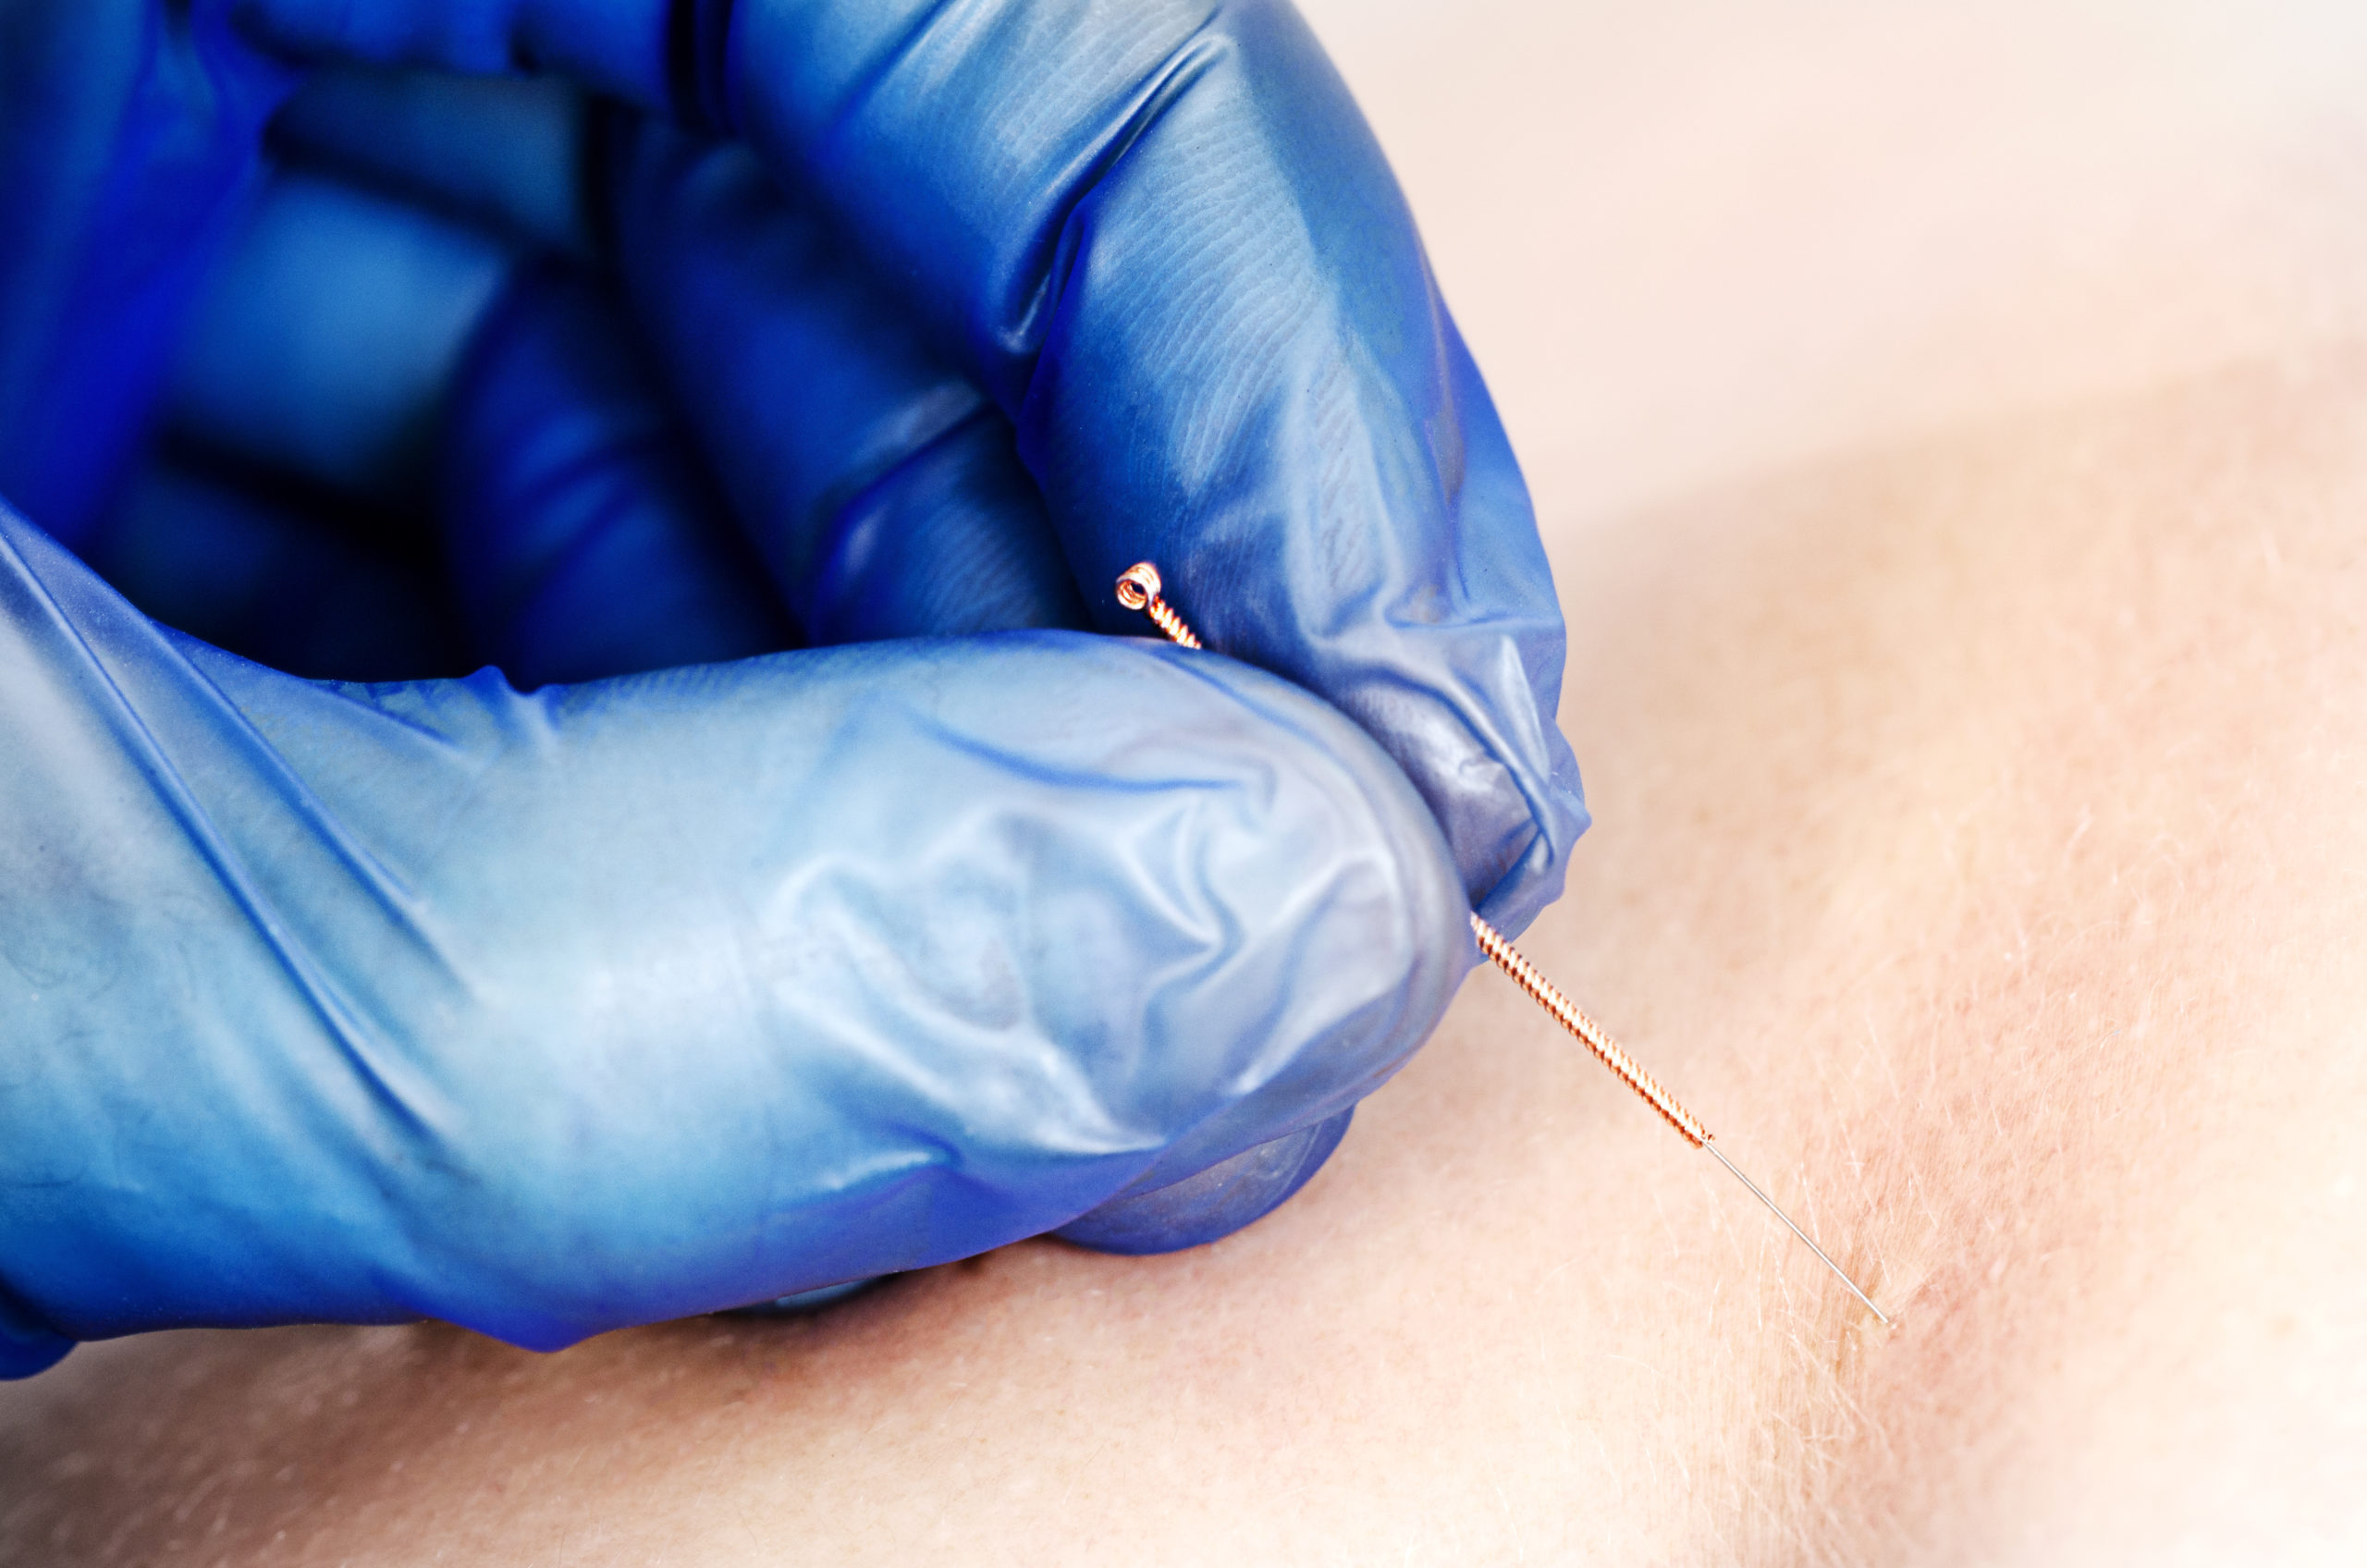 Needle and hands of physiotherapist doing a dry needling